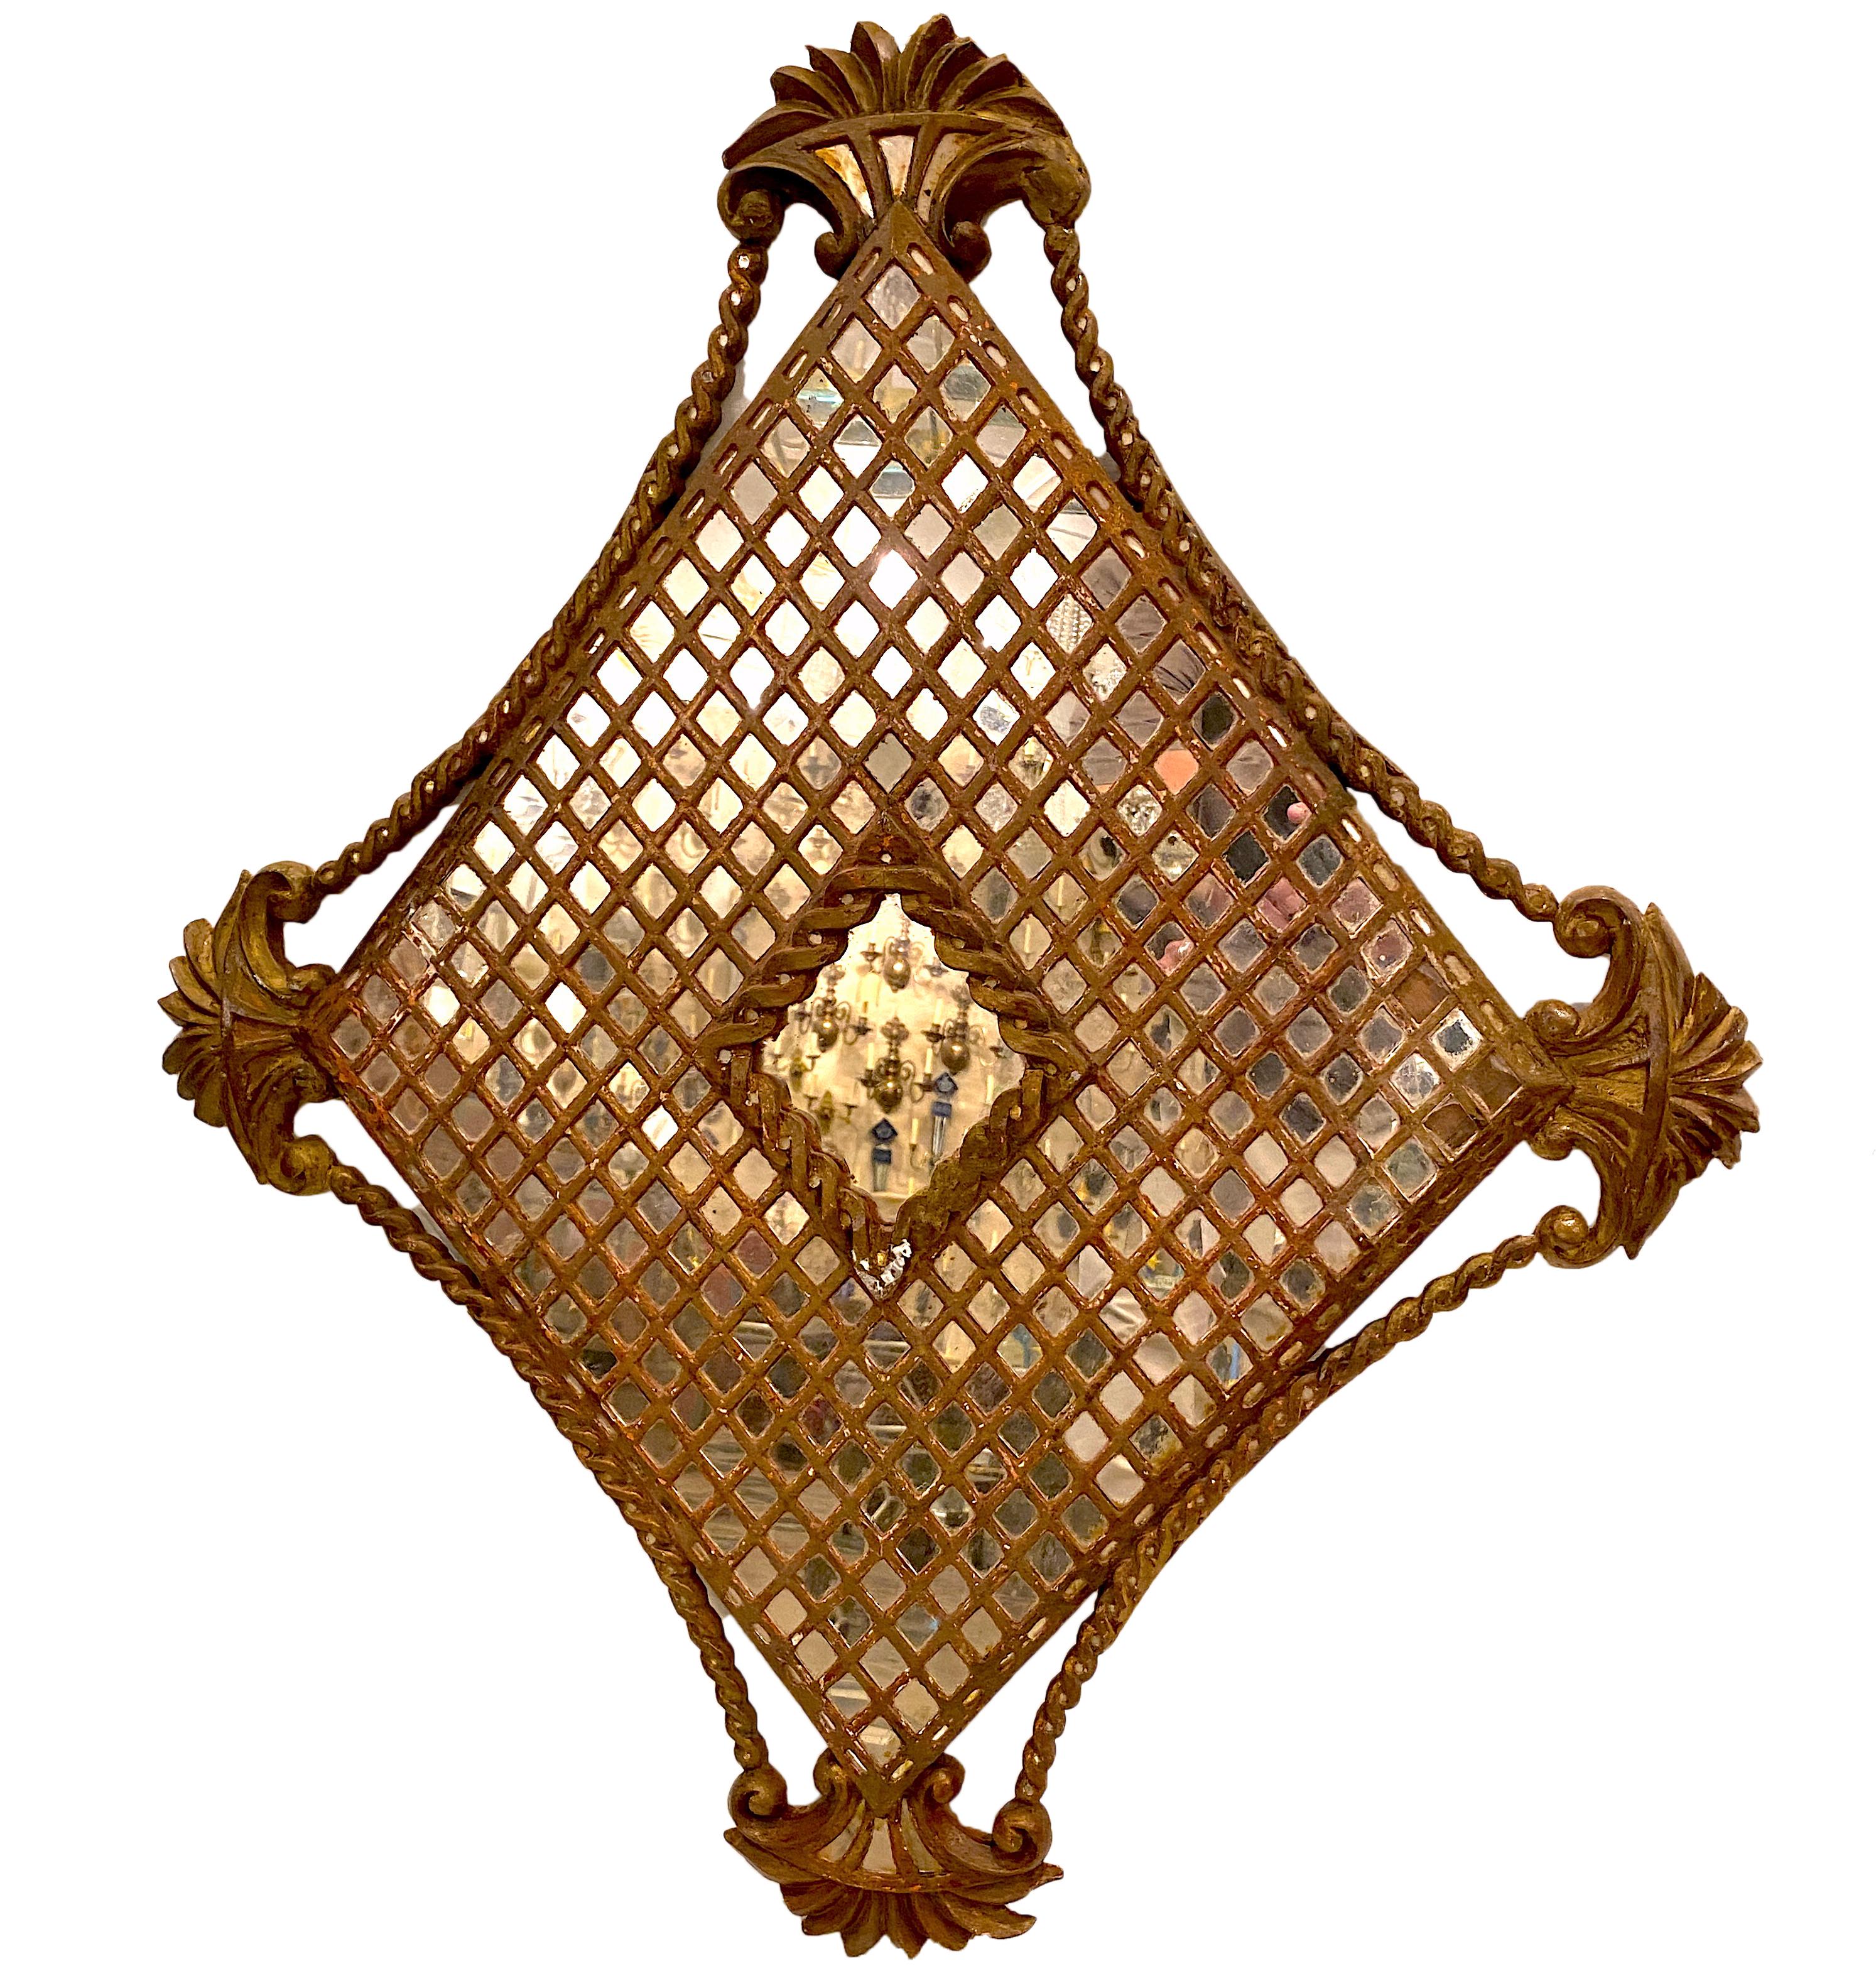 A circa 1900 Spanish gilt wood mirror with garland details.

Measurements:
Height: 37